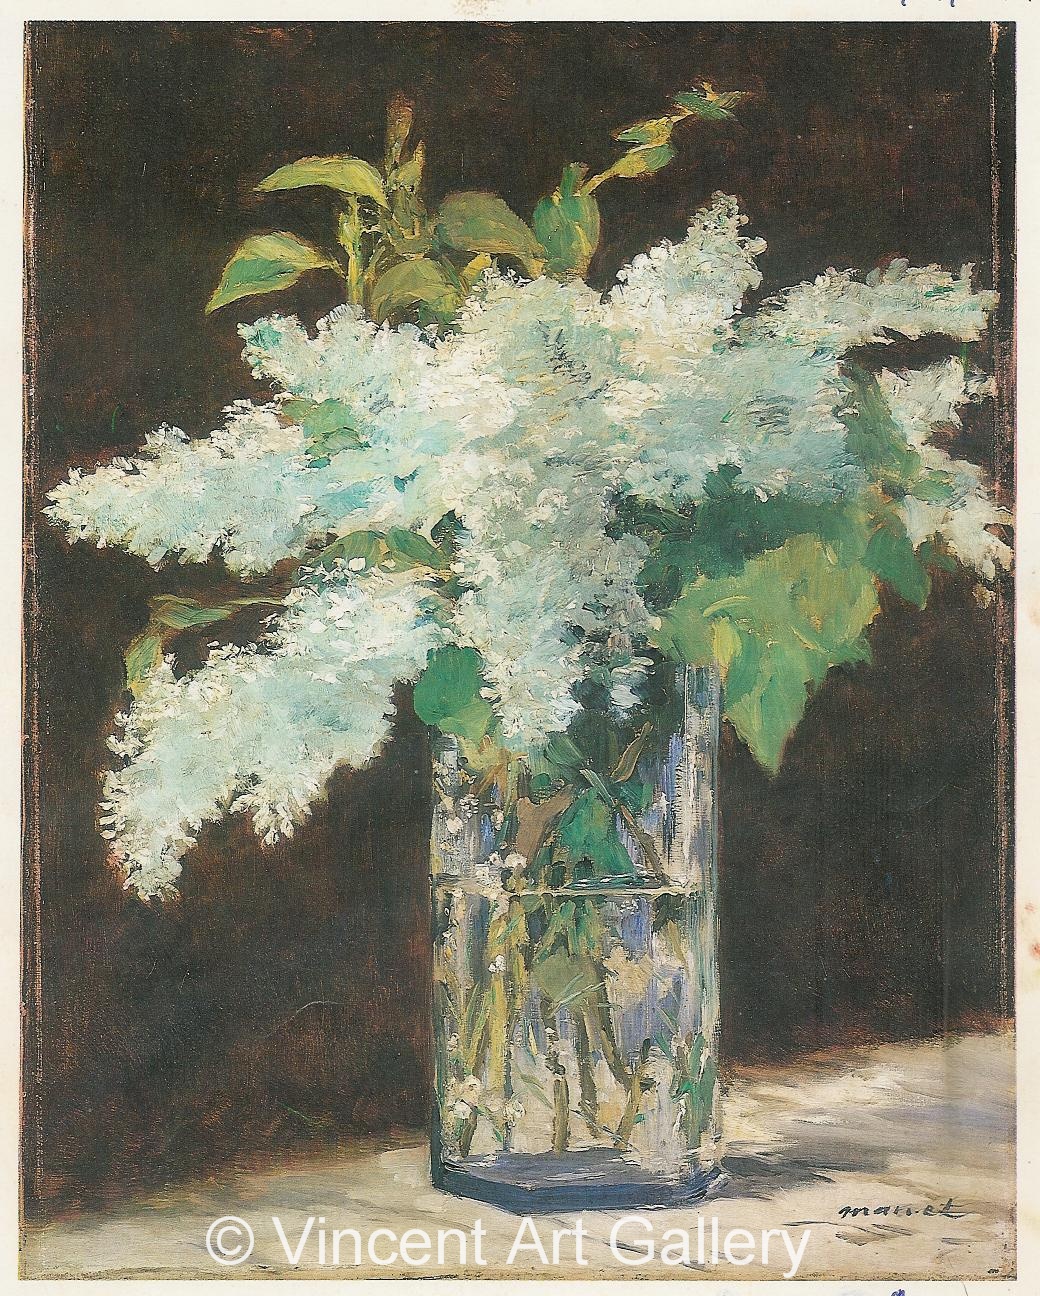 A231, MANET, Lilacs in a Vase